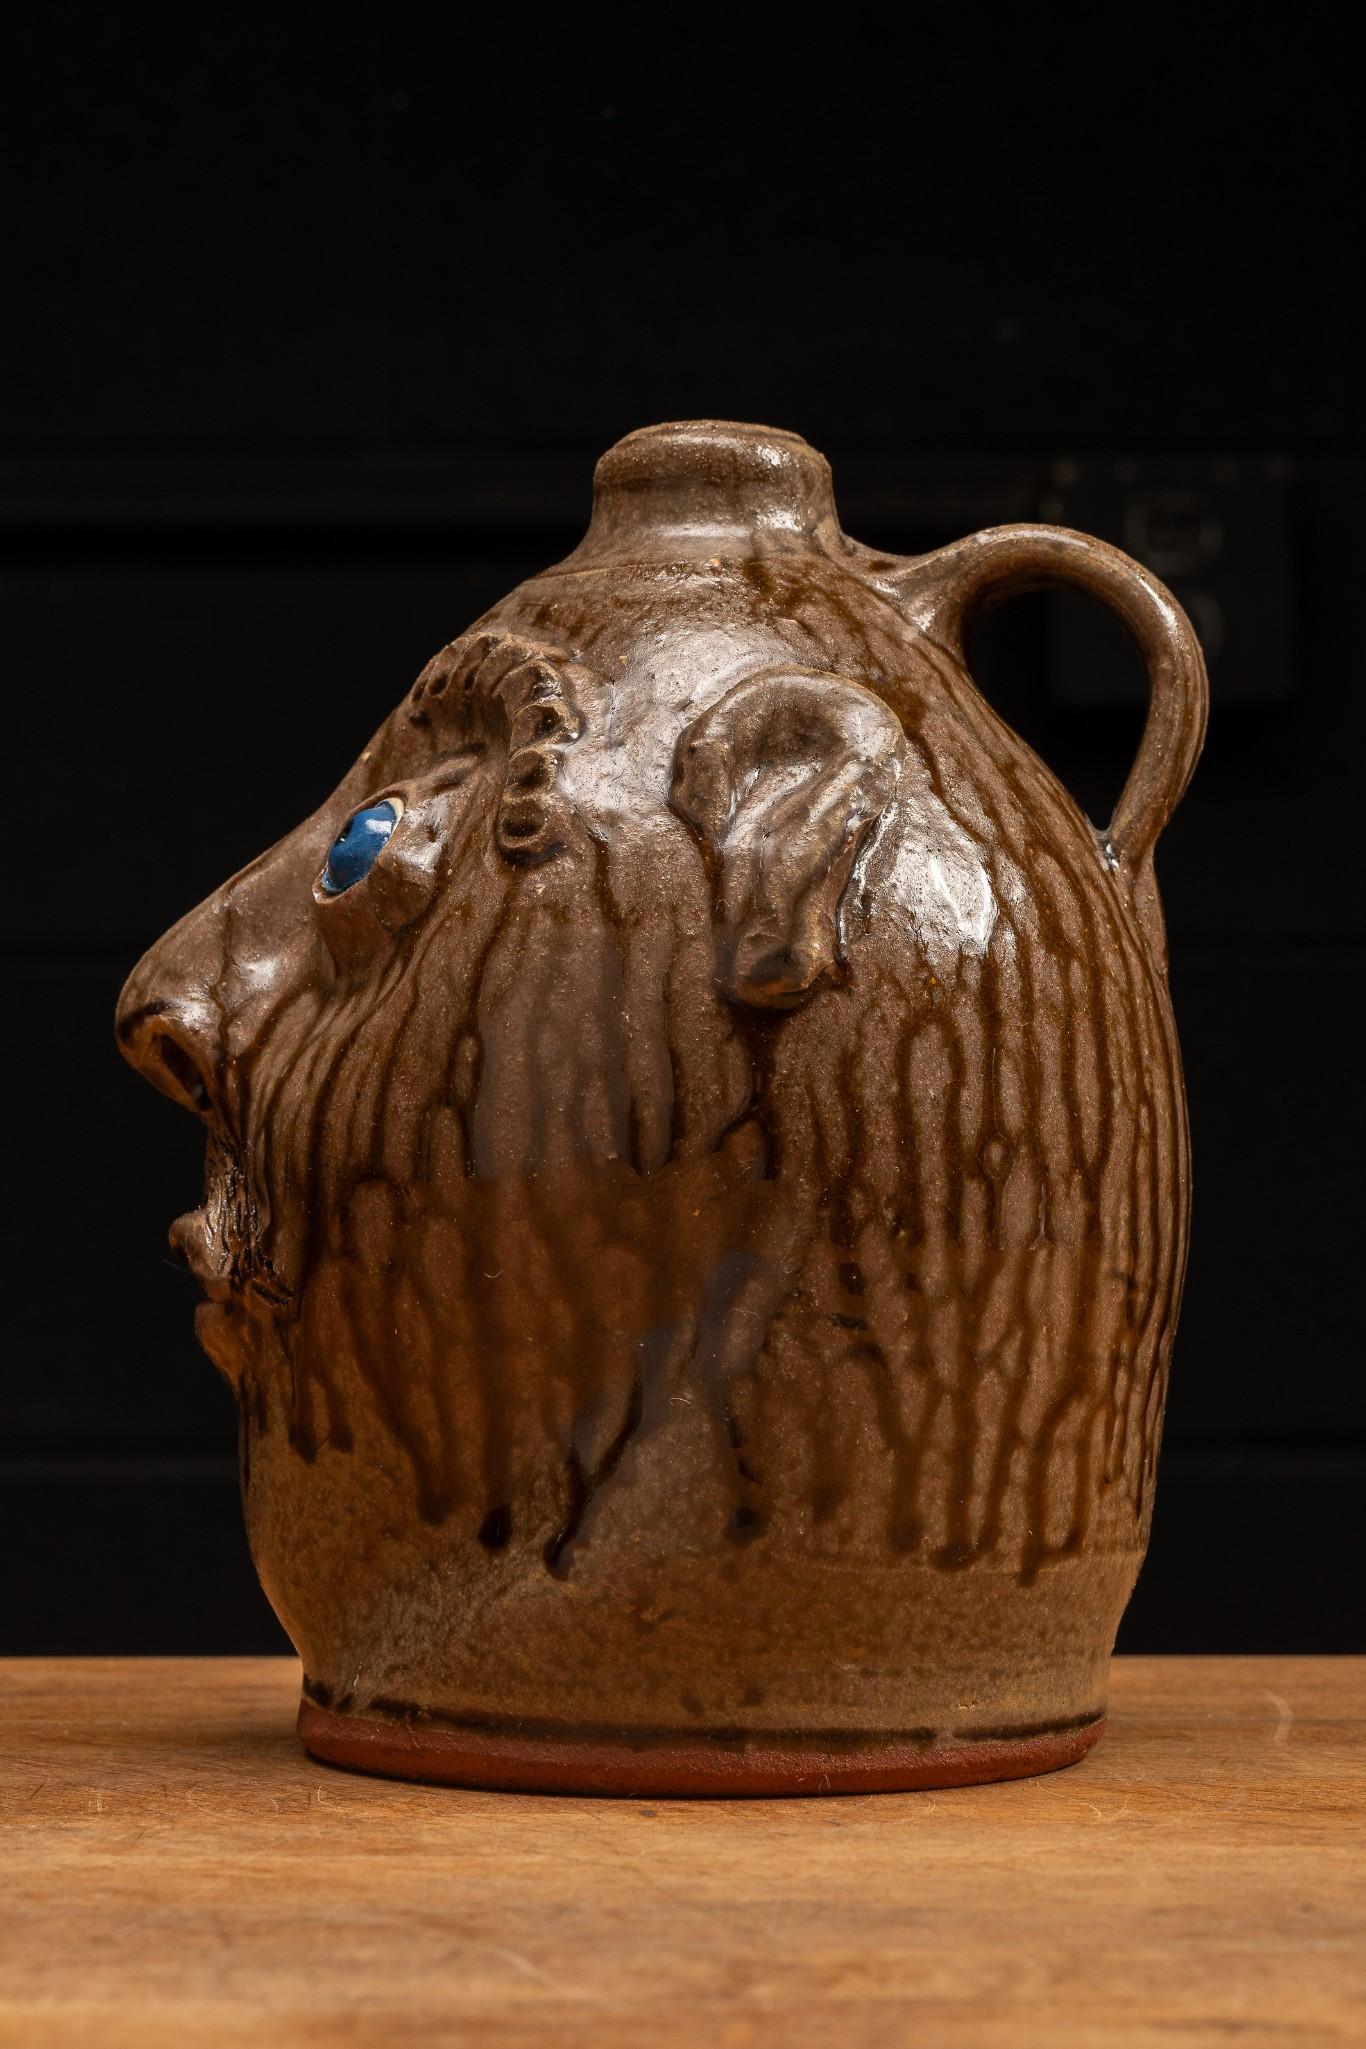 Brown Glazeware Face Jug with Blue Eyes by Mike Craven